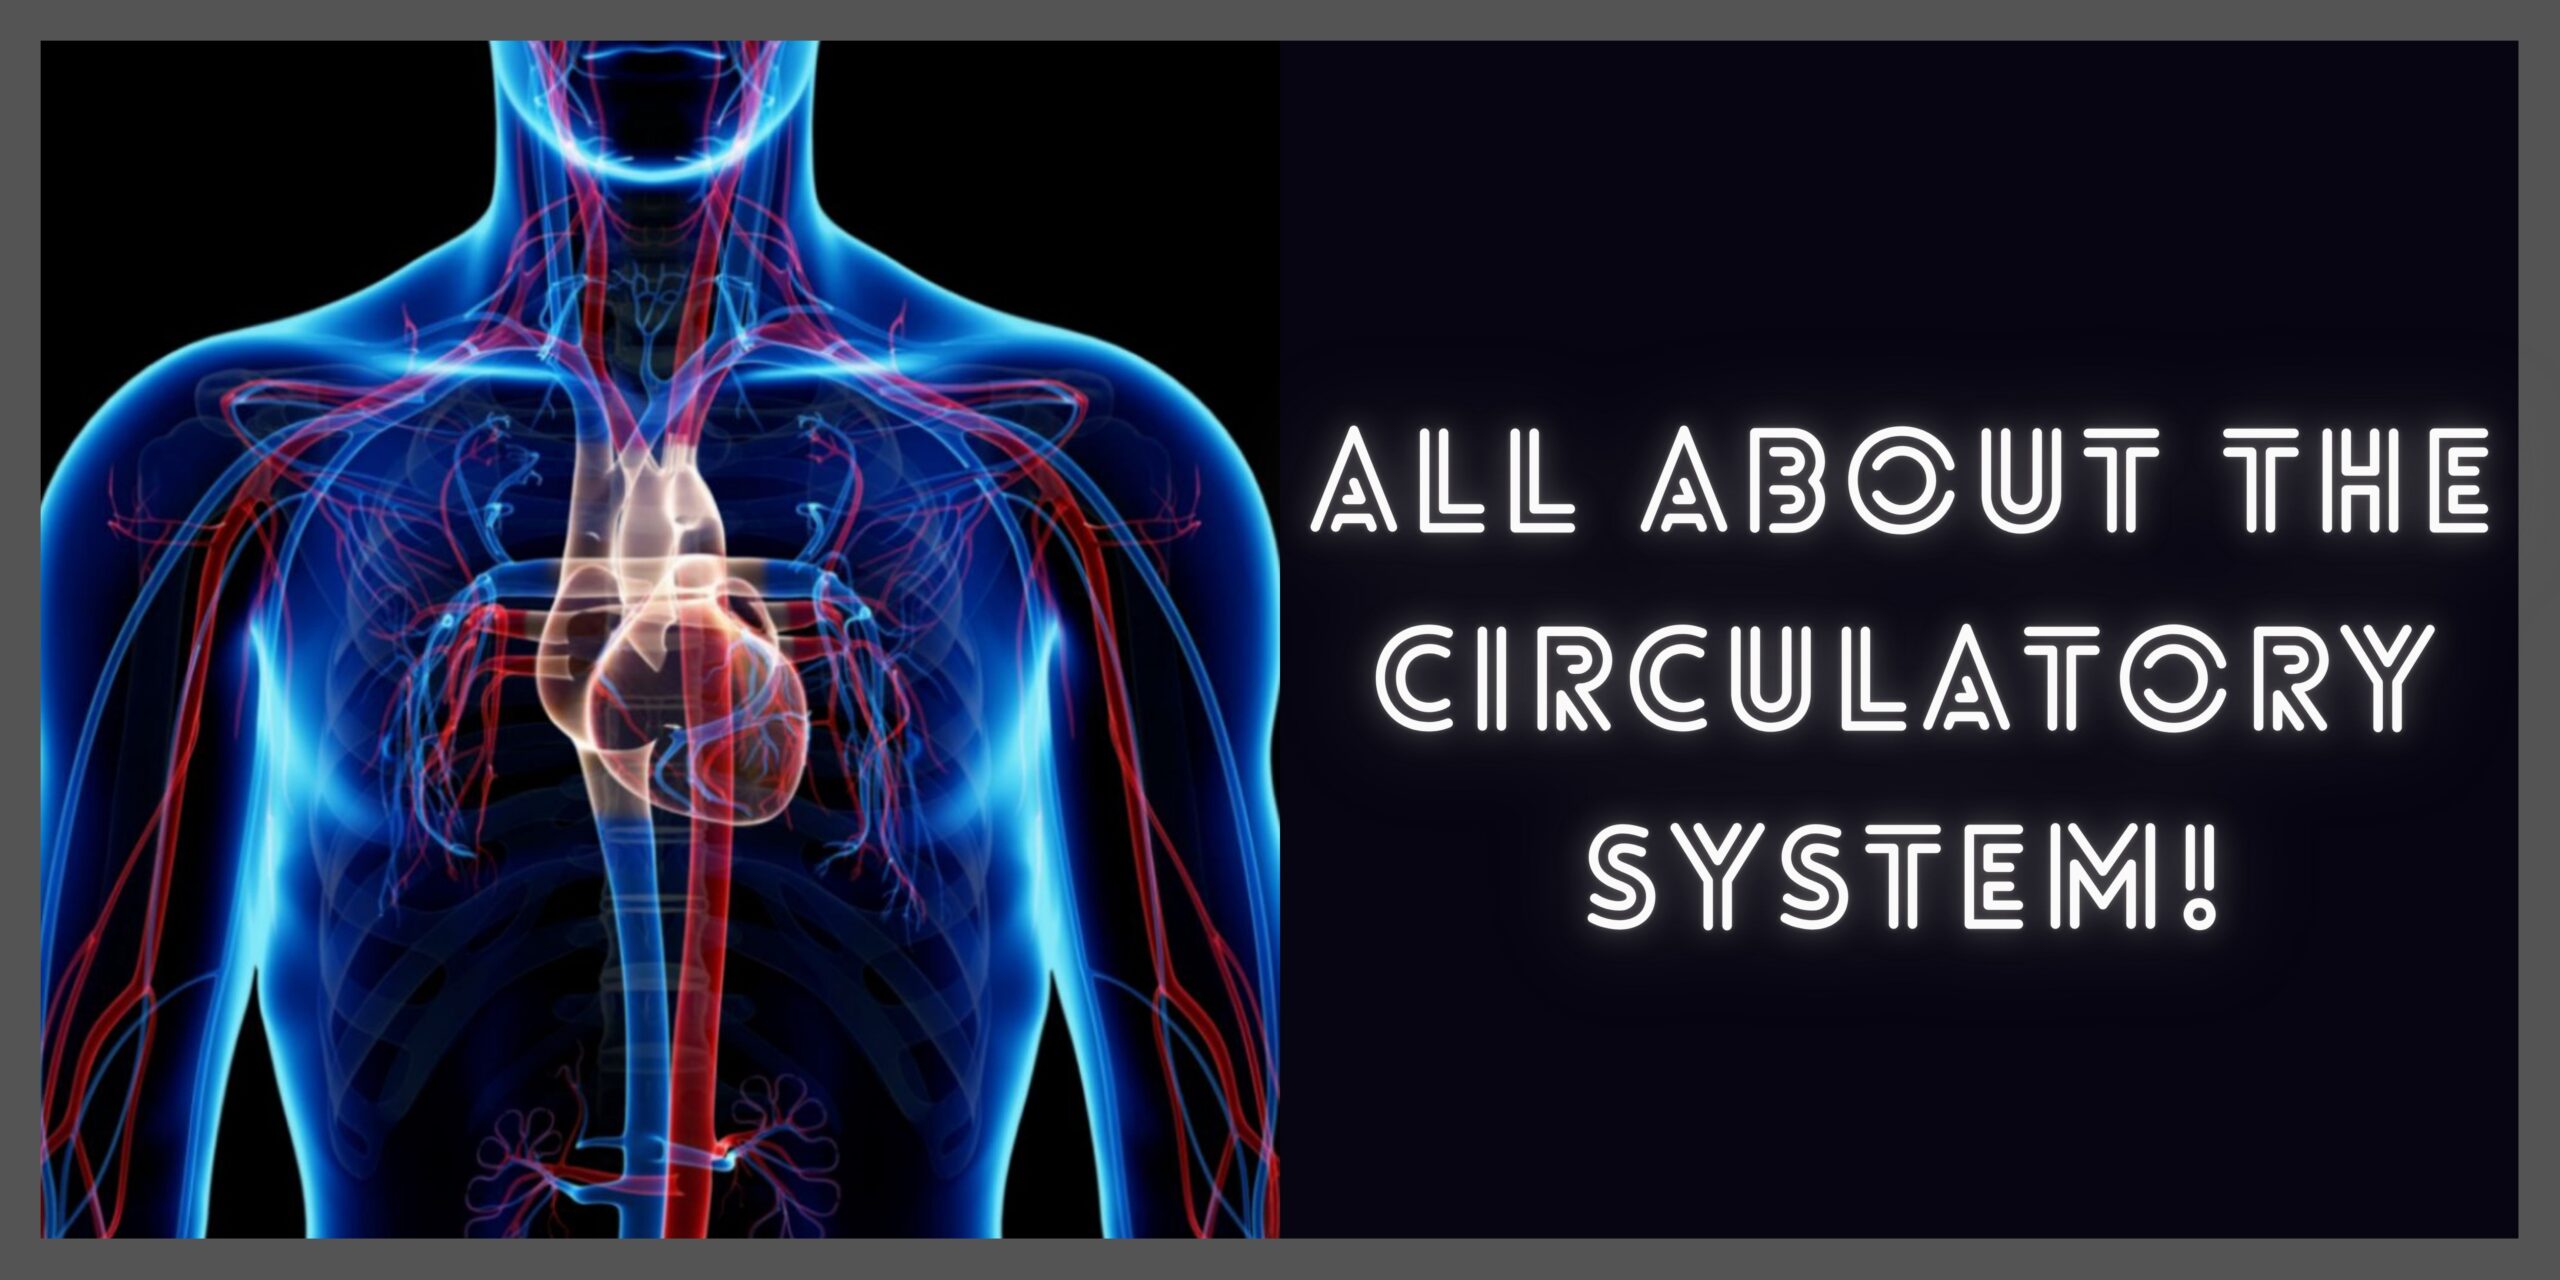 All you need to know about the Circulatory System